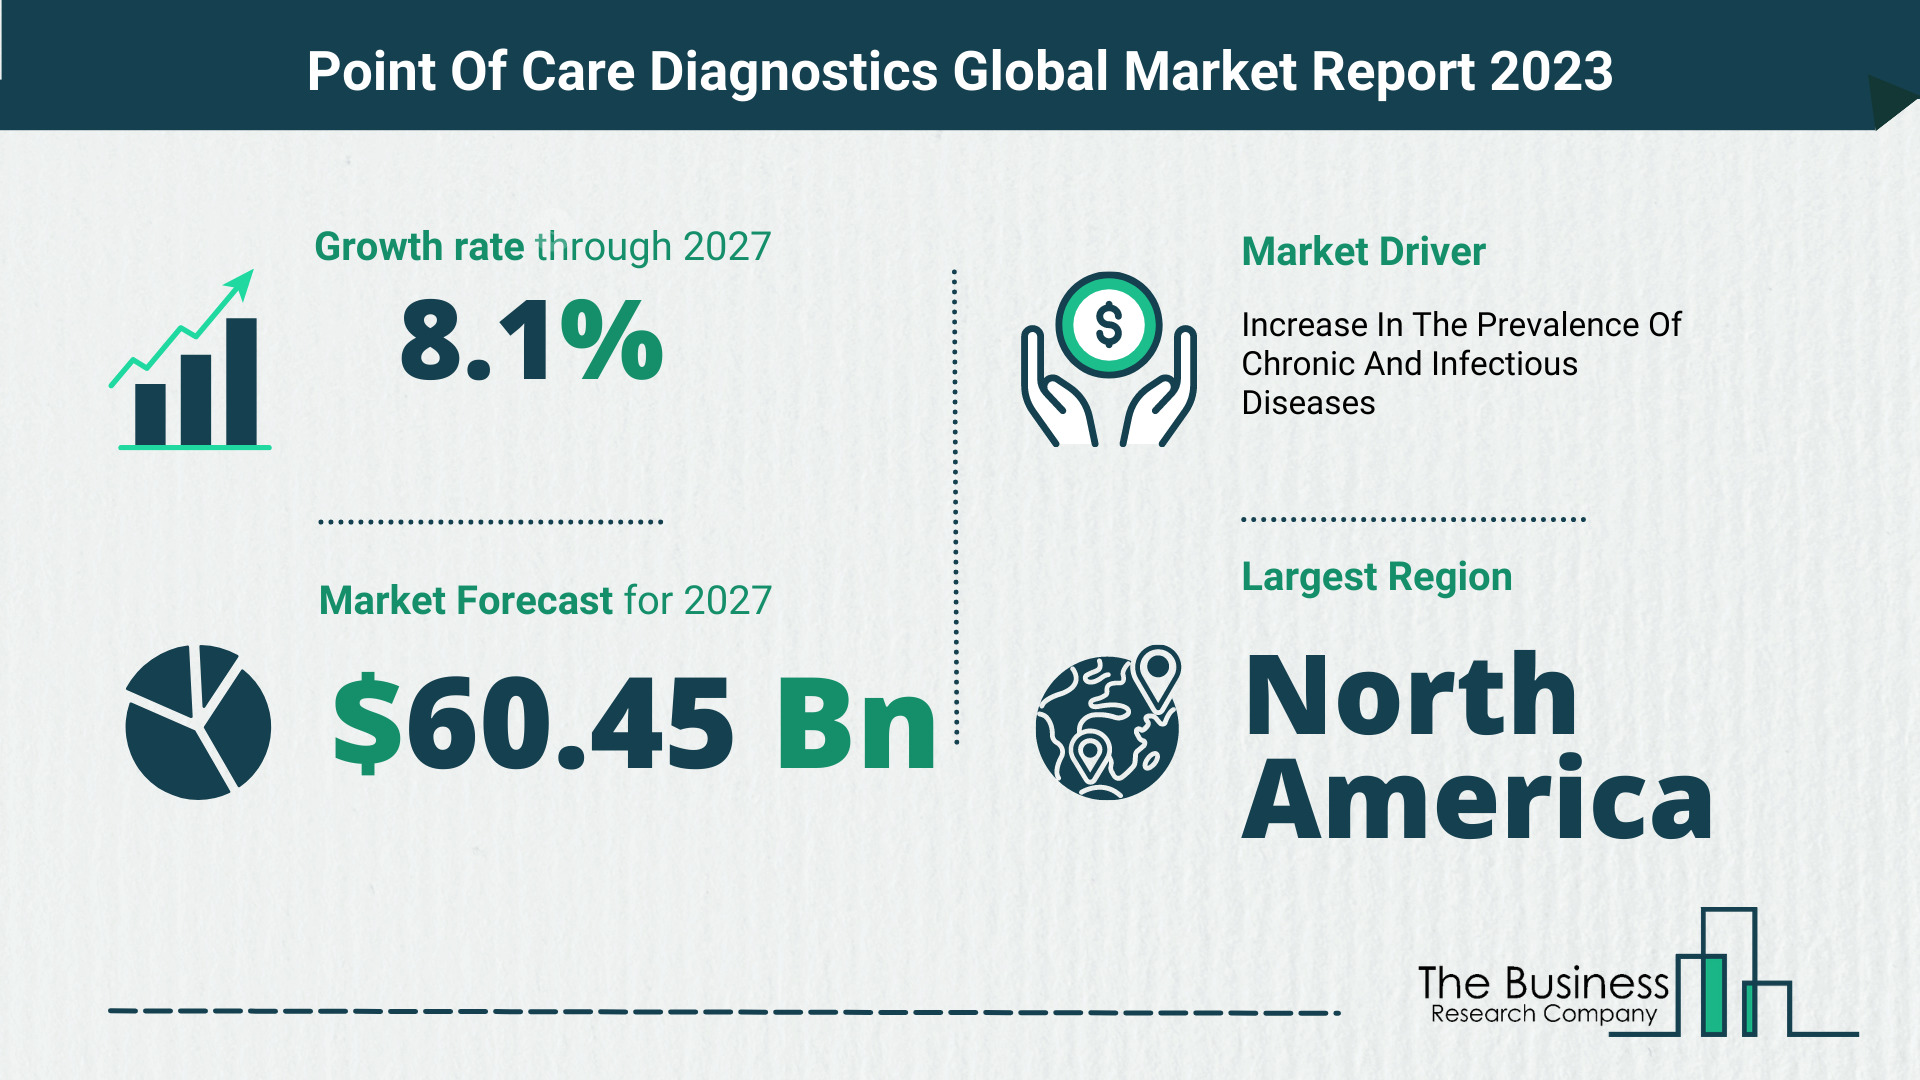 How Will The Point Of Care Diagnostics Market Globally Expand In 2023?